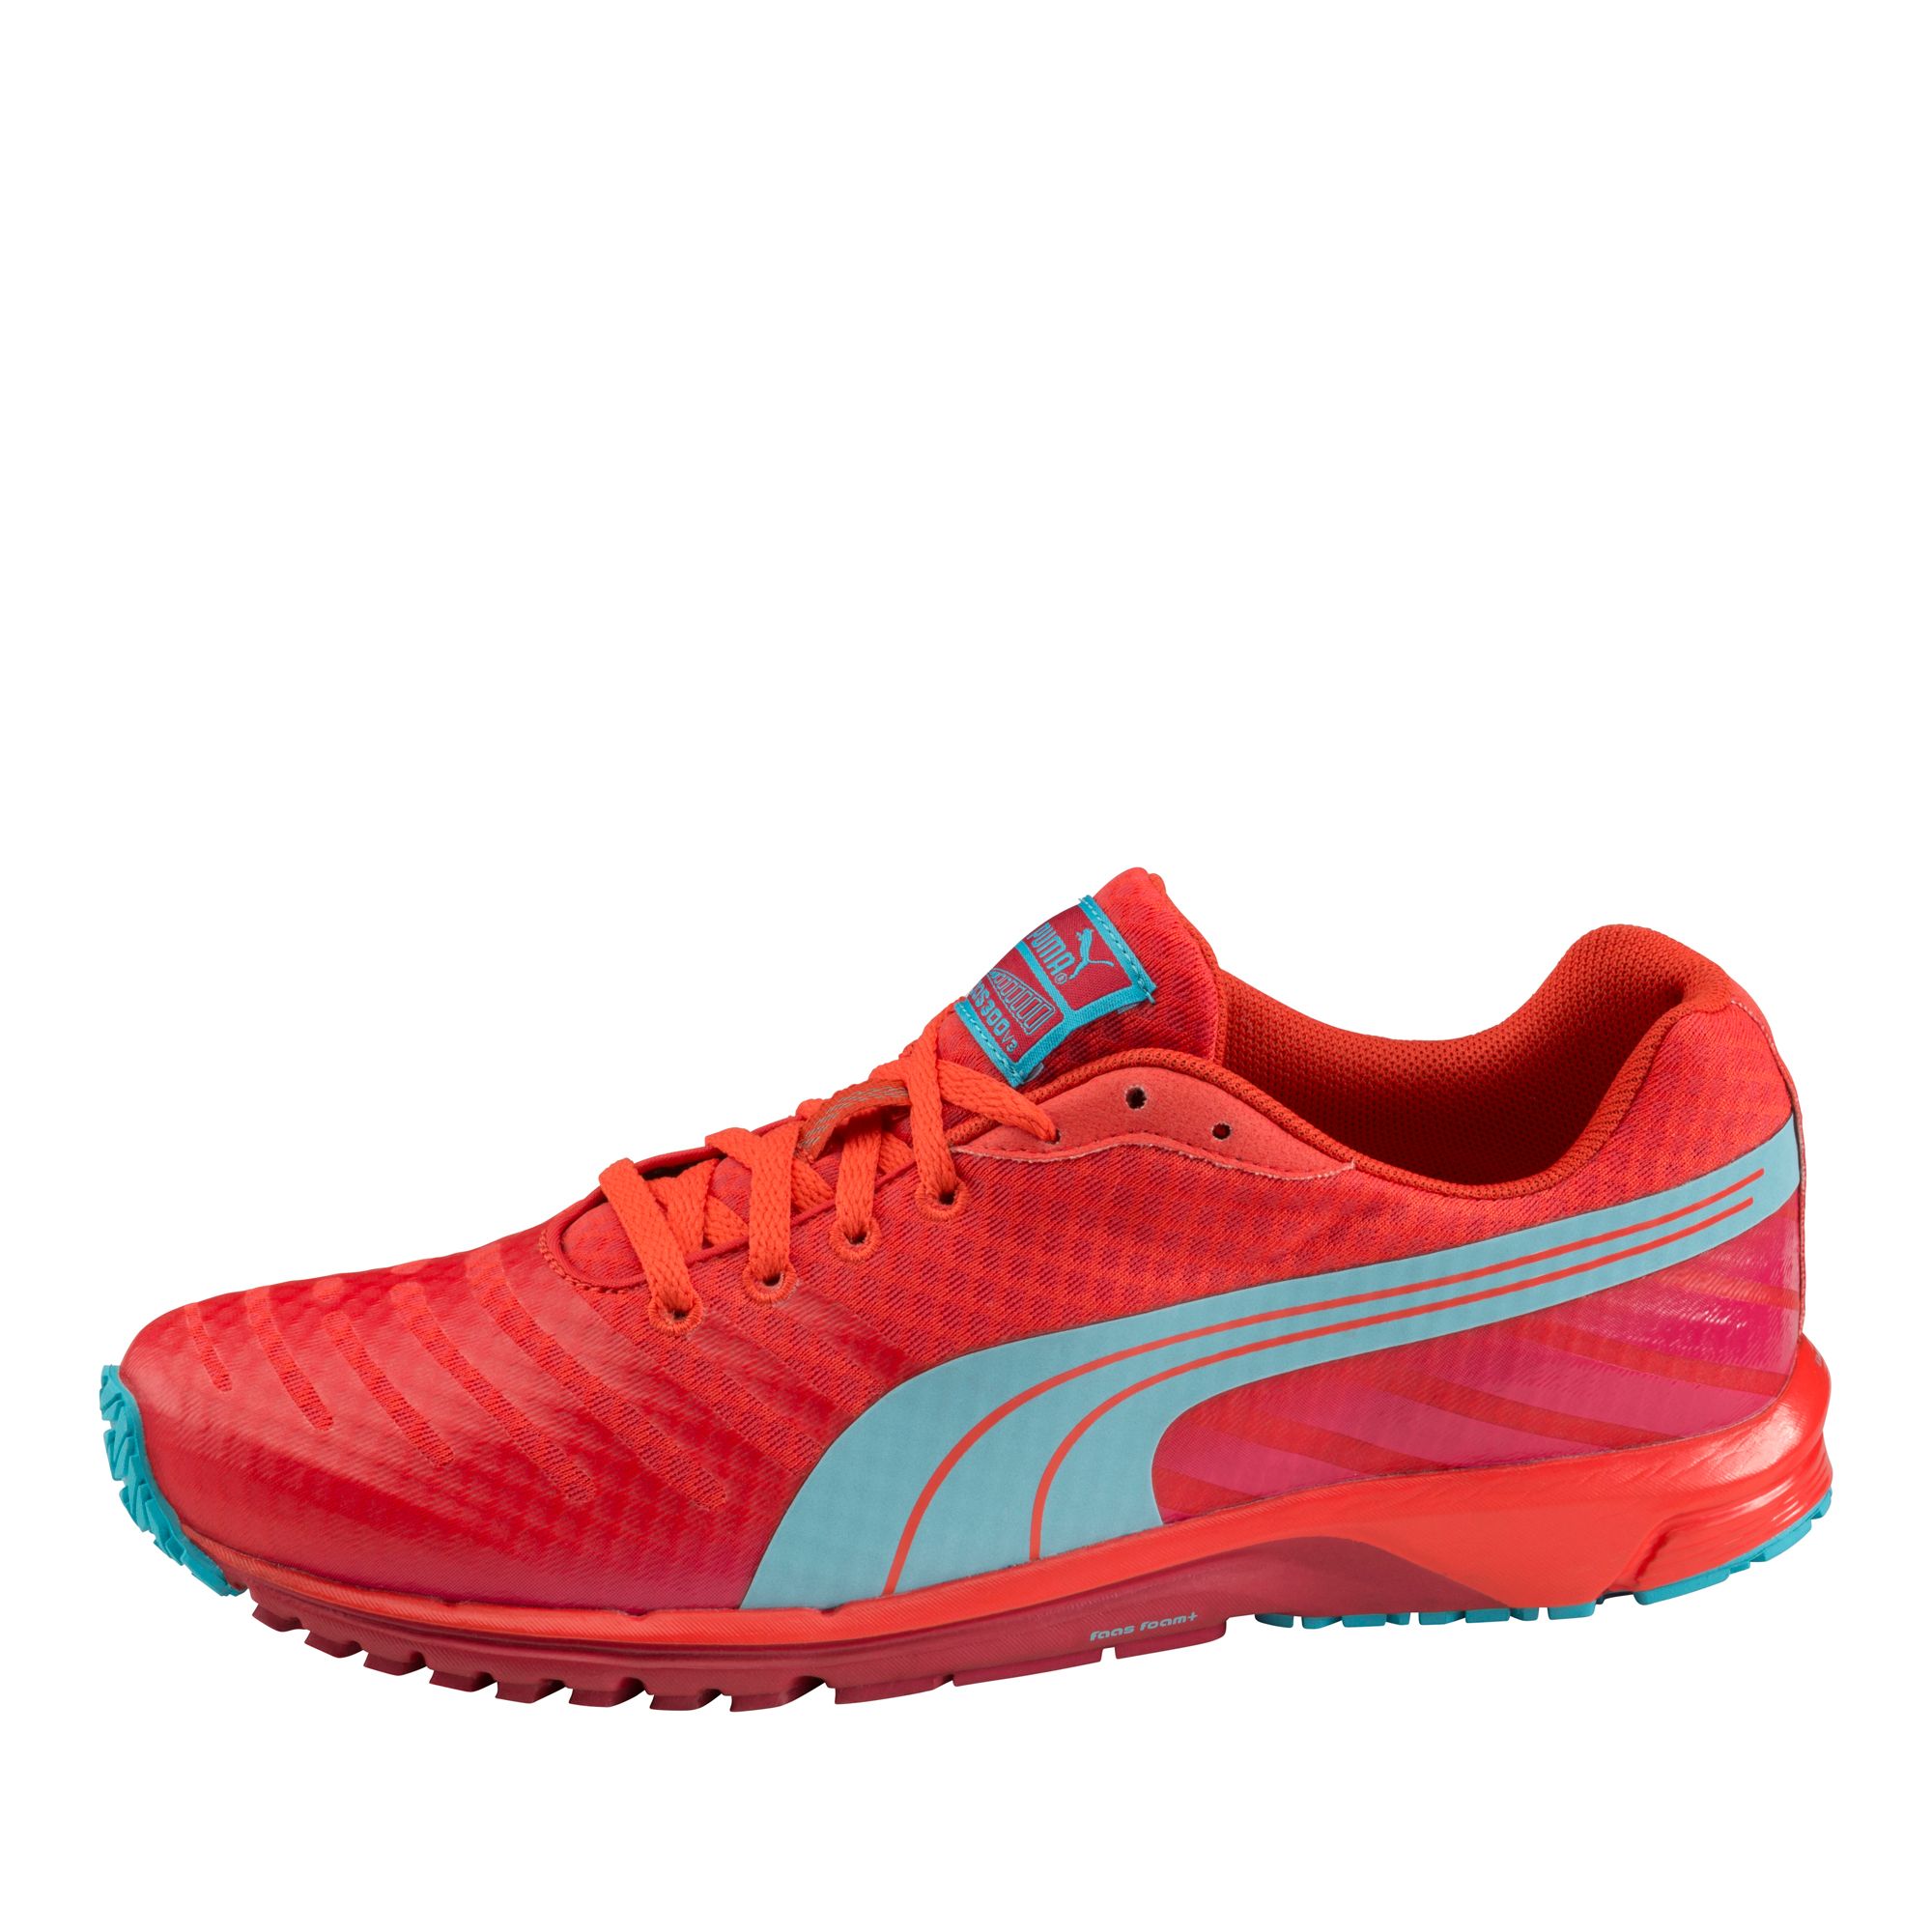 FAAS 300 v3 Running Shoes 